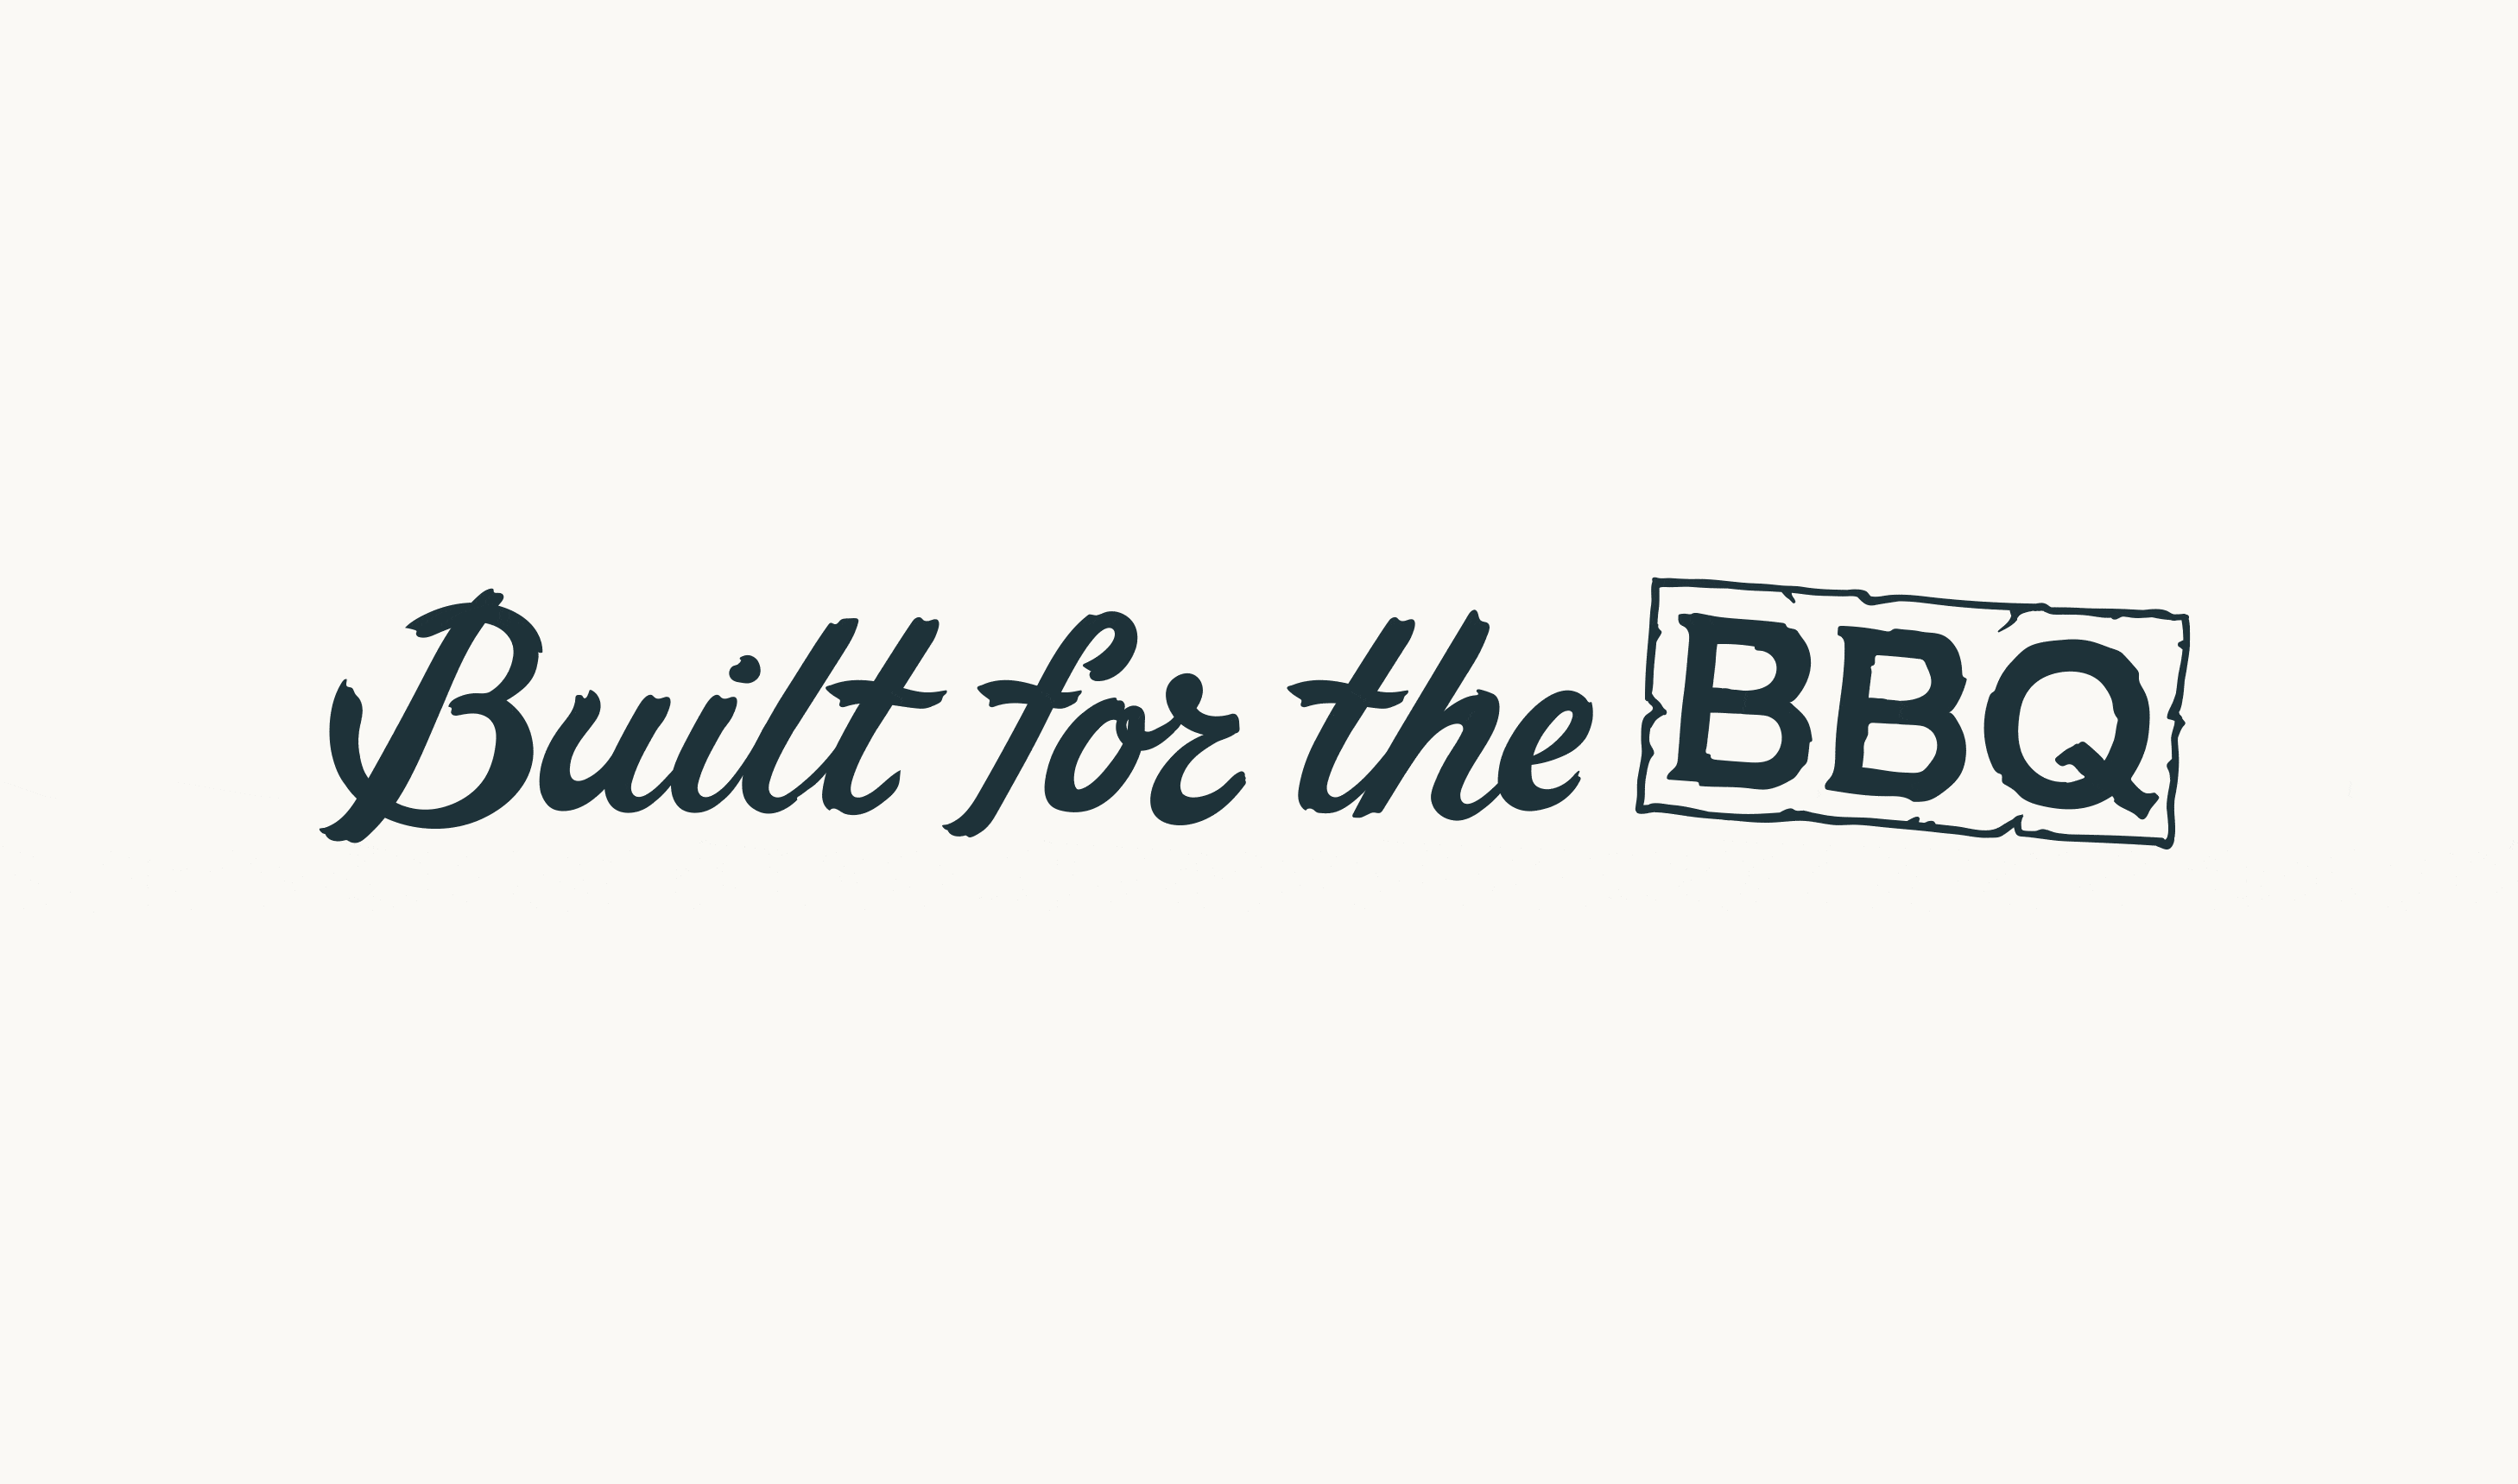 Built for the BBQ